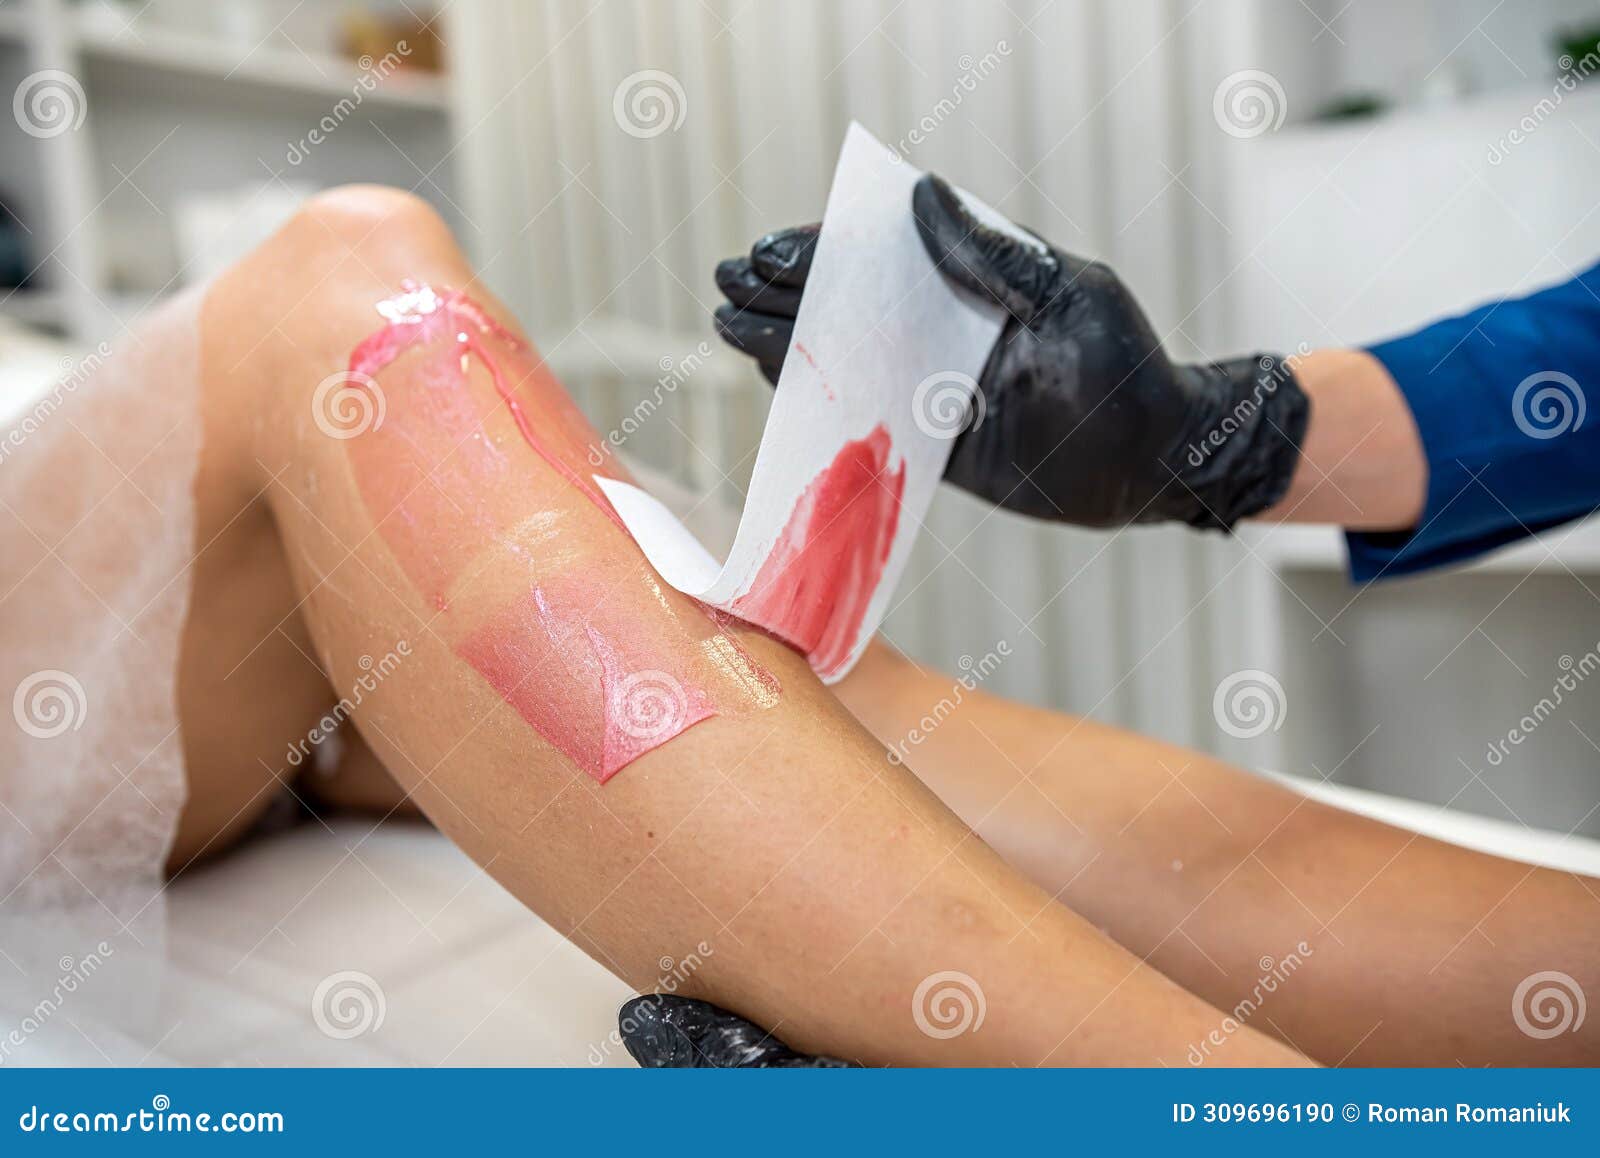 woman doing epilation shugaring with hot pasta removing unwanted hair on legs